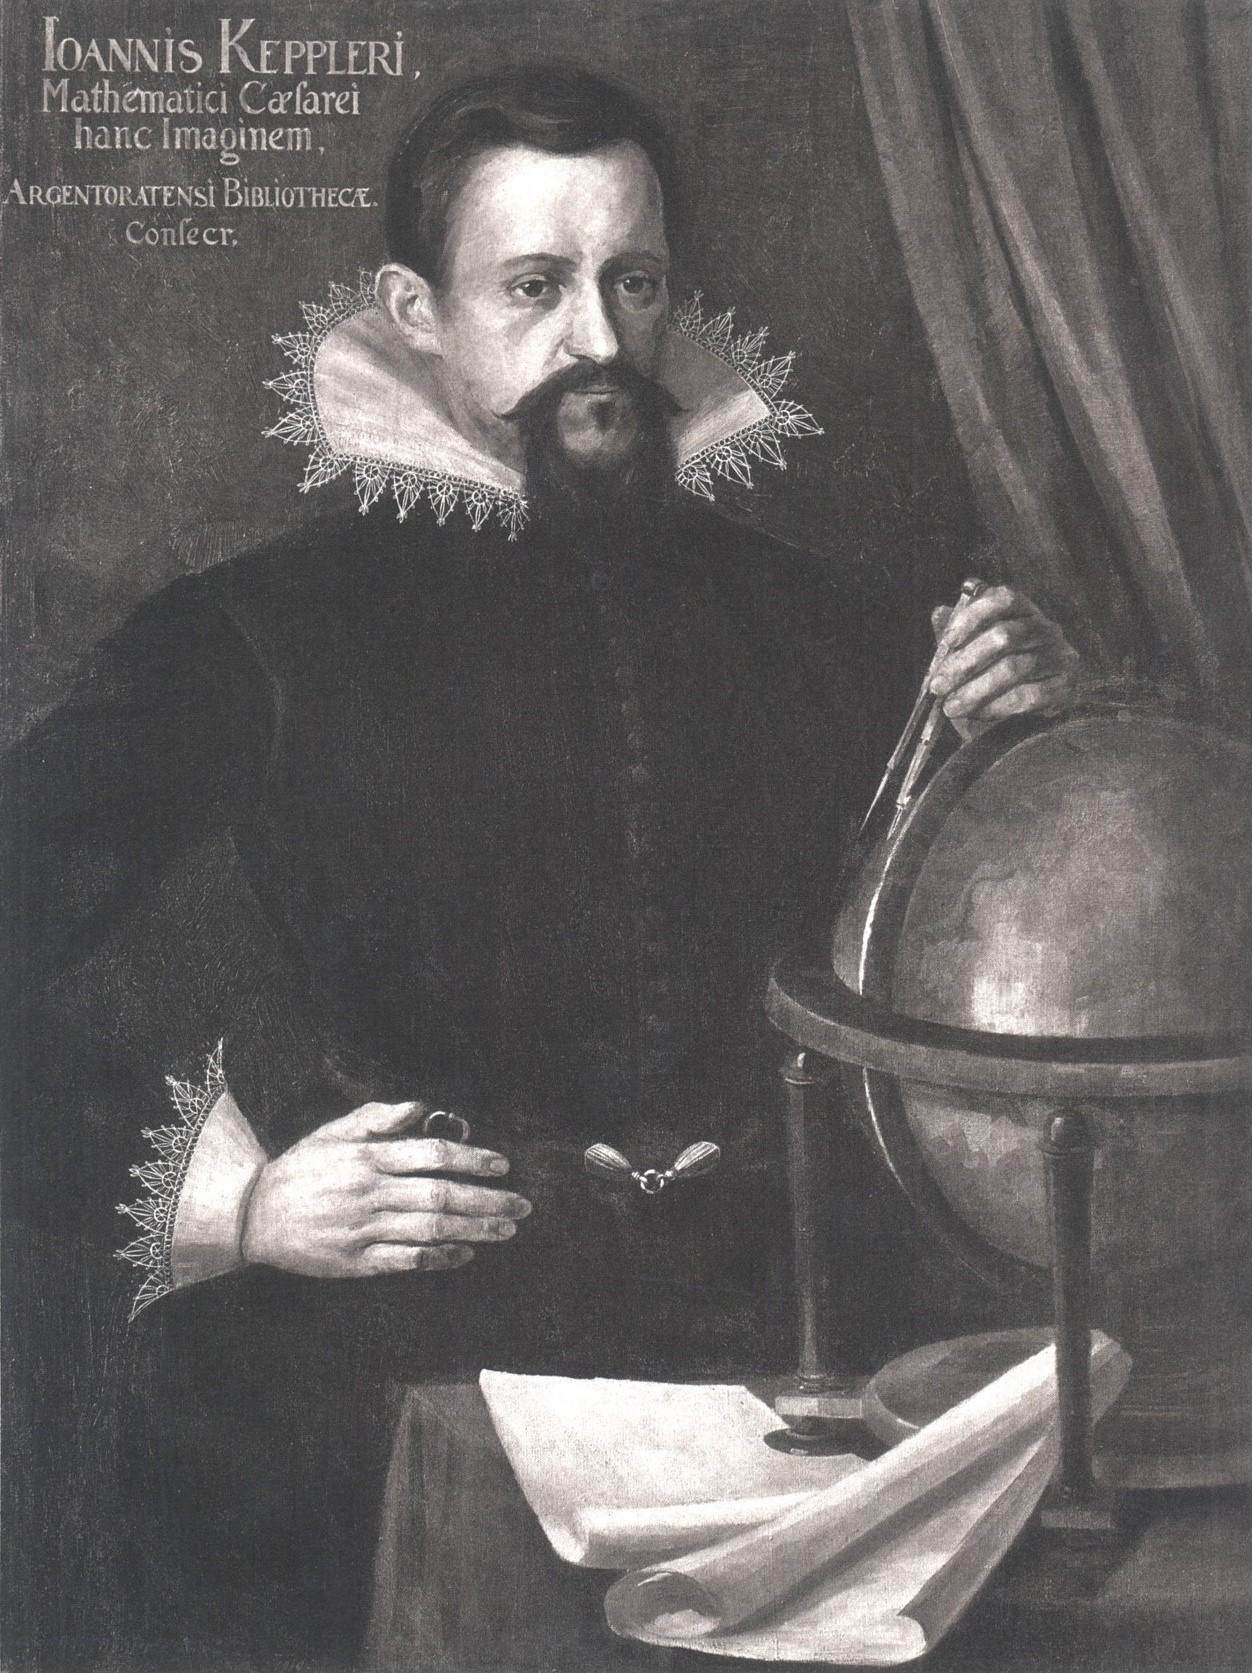 Portrait of Johannes Kepler with a white lace collar around his neck, standing next to a globe, holding a compass in his left hand.